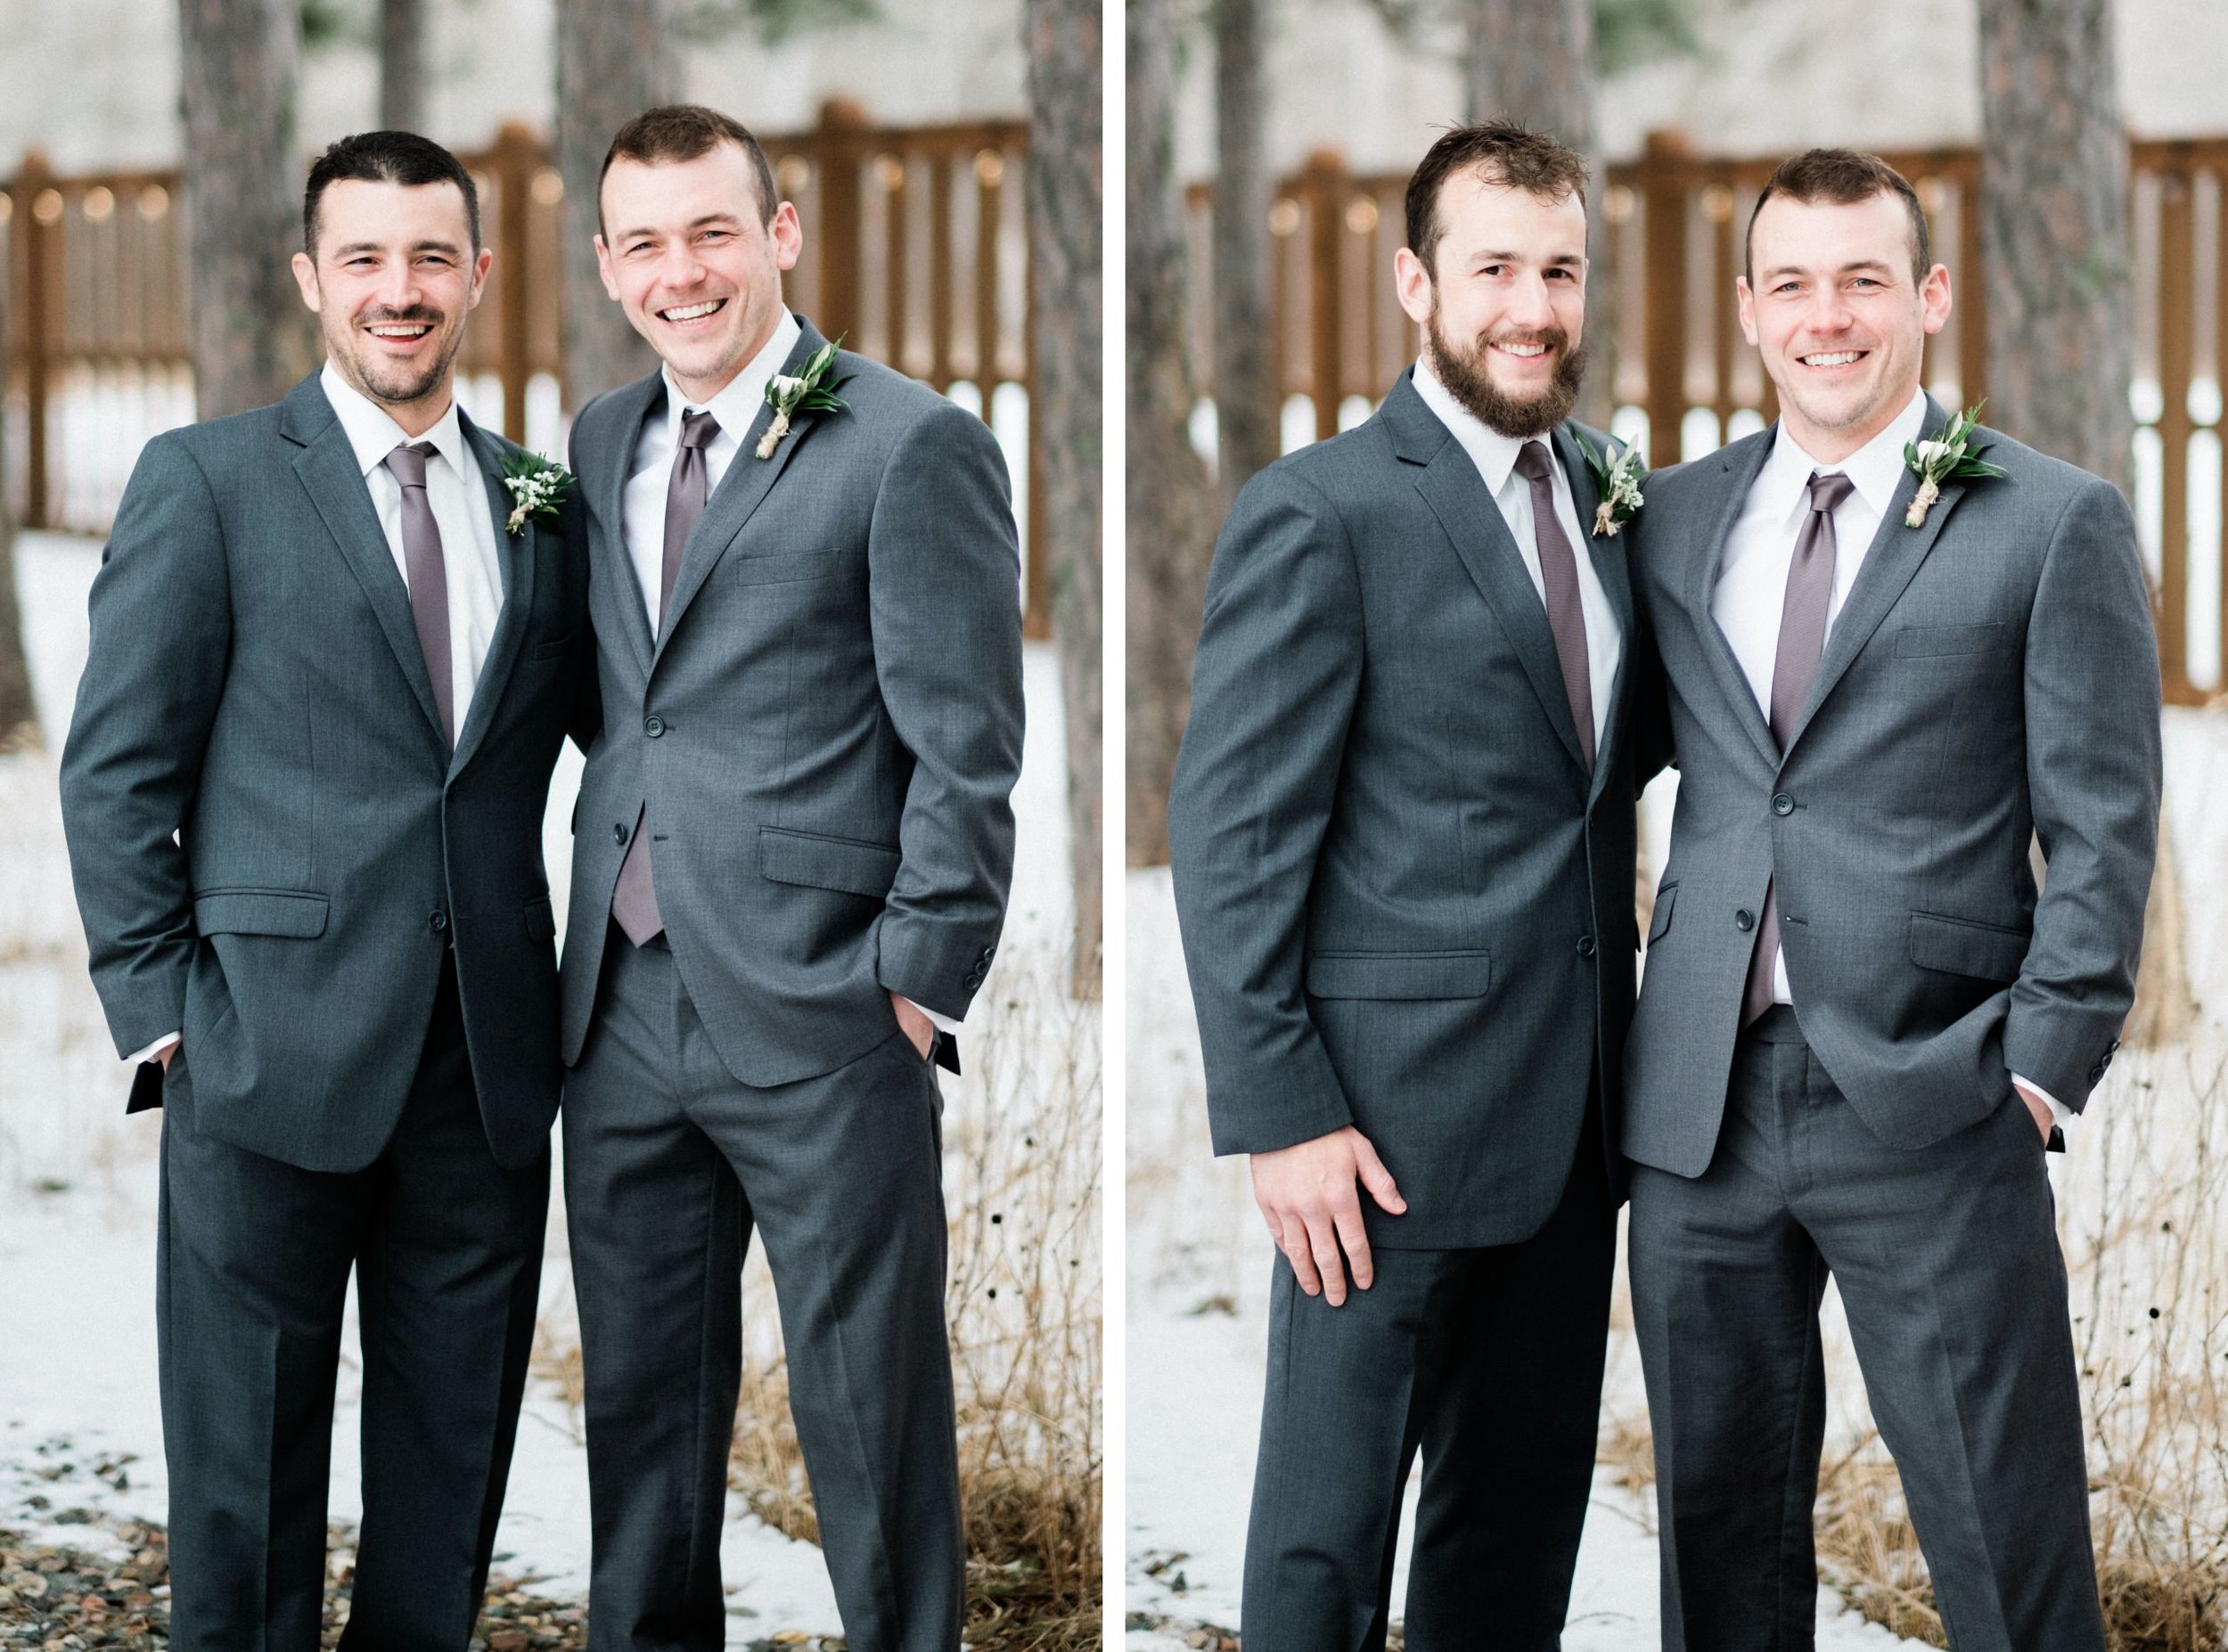 Wedding party portraits at Pine Peaks Event Center in Northern, 